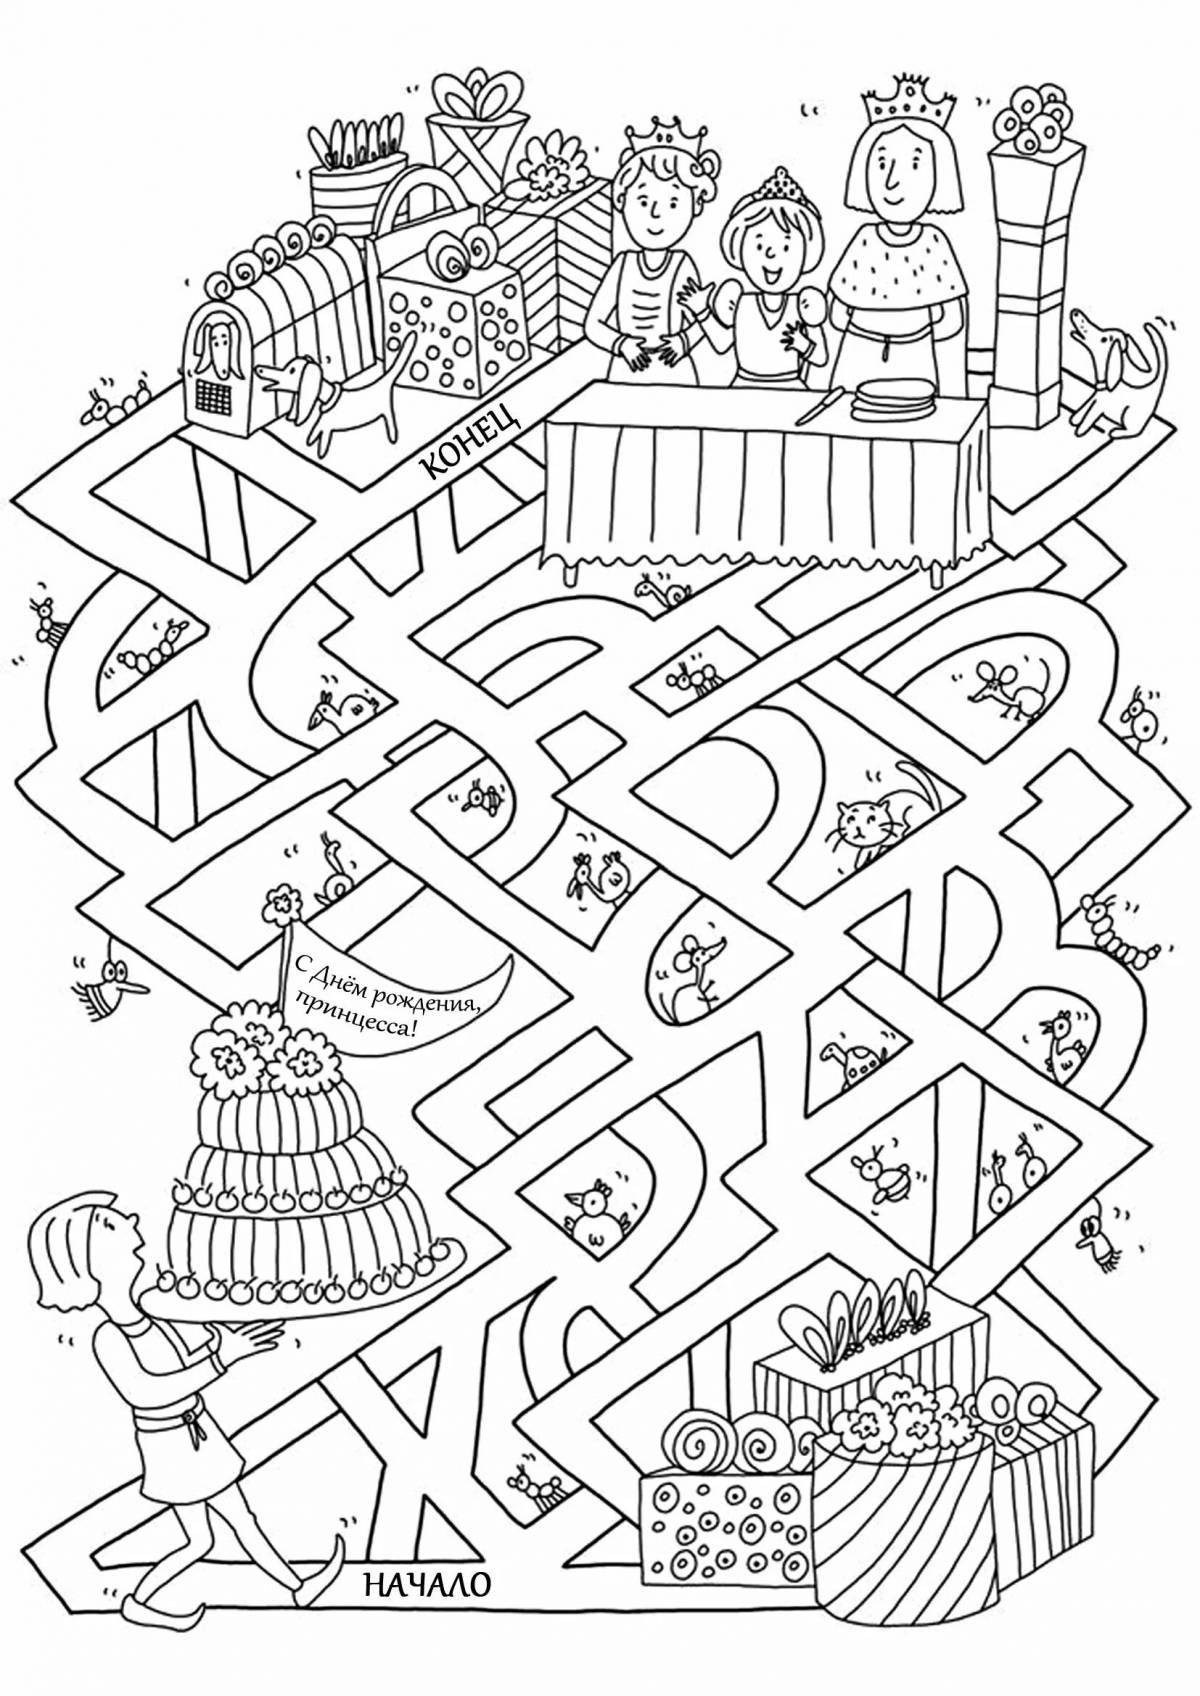 An interesting maze coloring book for children 9-10 years old